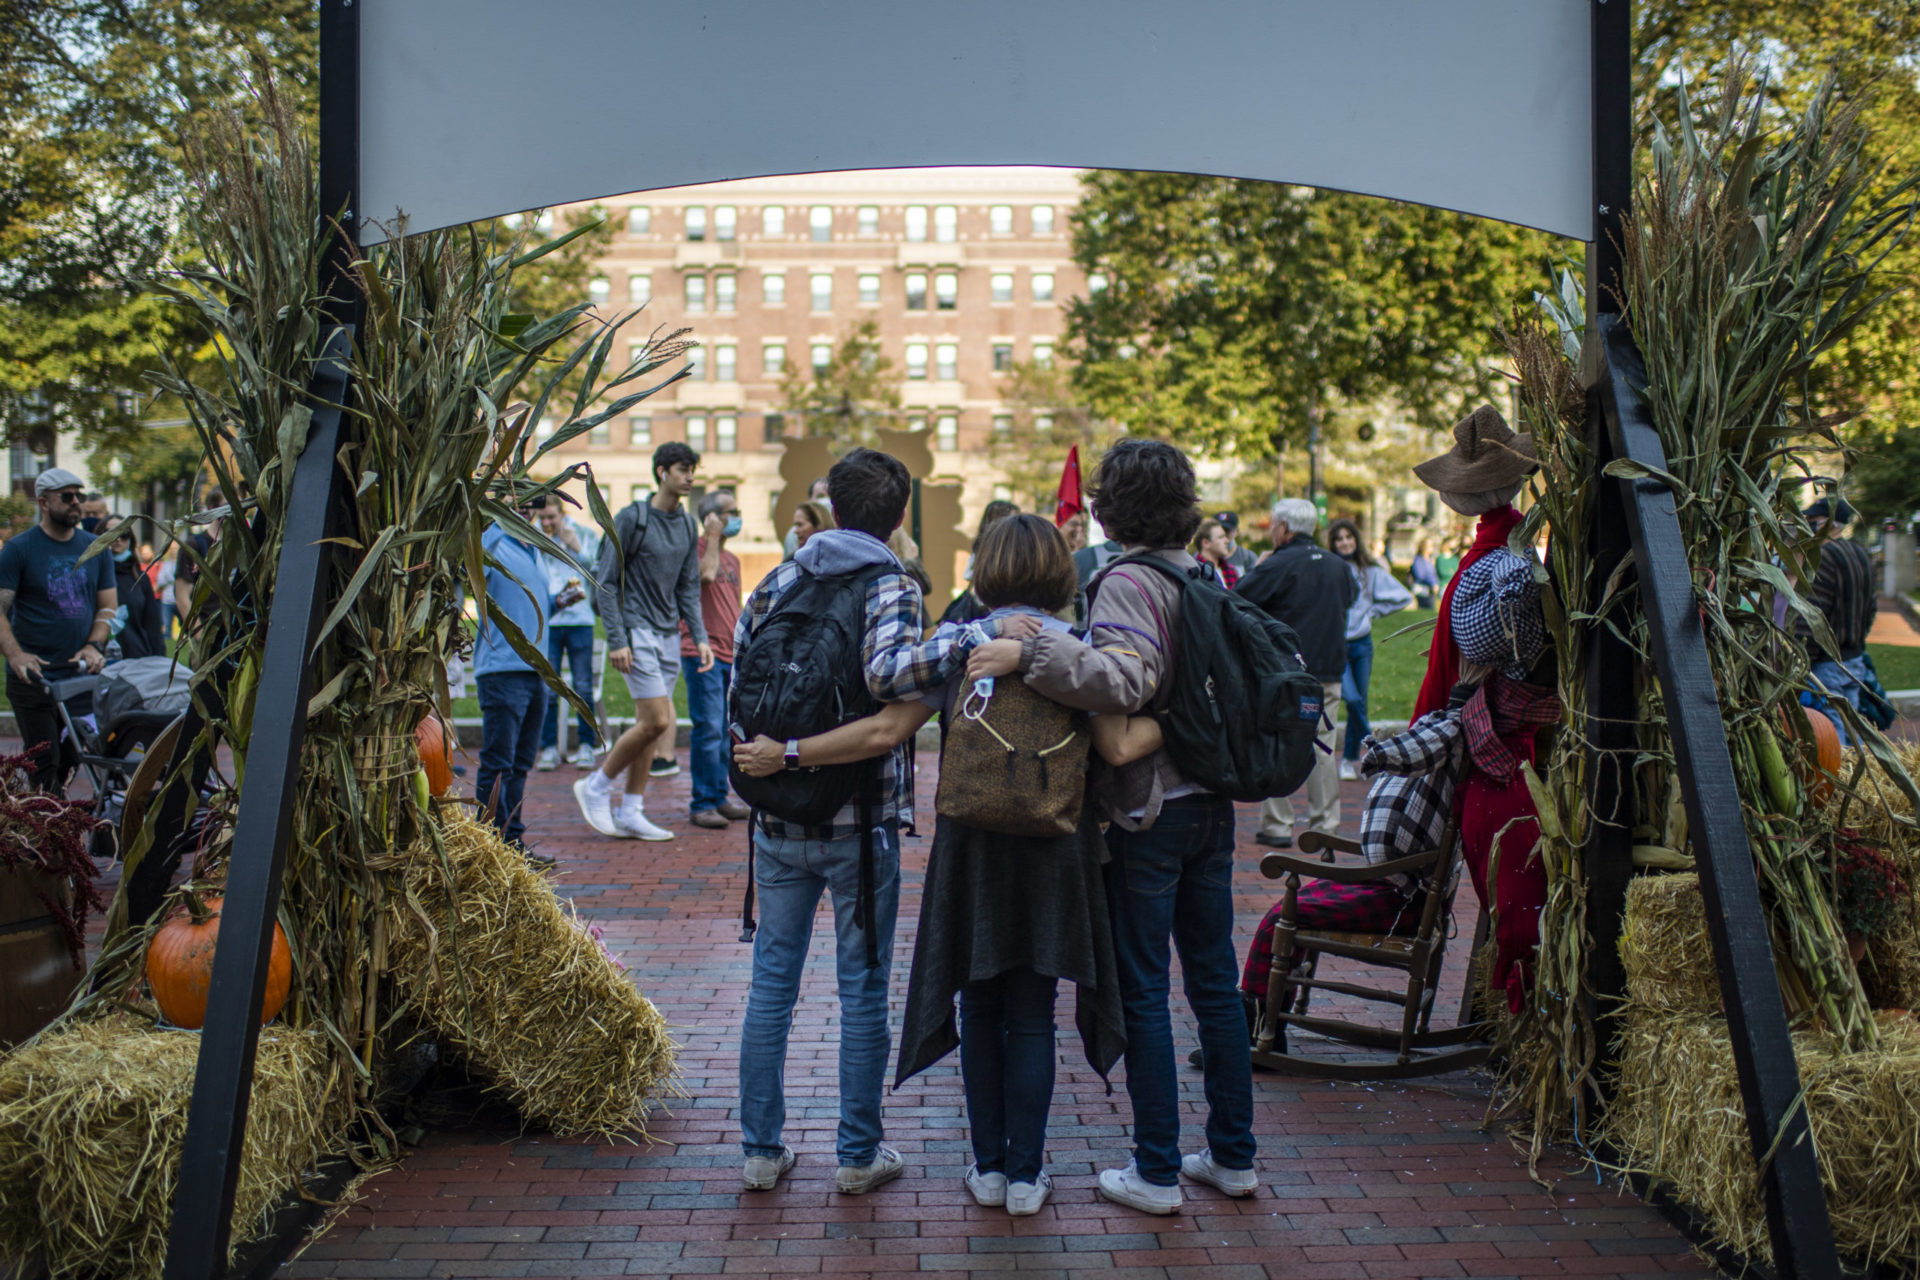 10/22/21 - BOSTON, MA. - Family members pose for photographs with students before a tour of the Northeastern arboretum on Friday, Oct. 22, 2021 . Photo by Alyssa Stone/Northeastern University